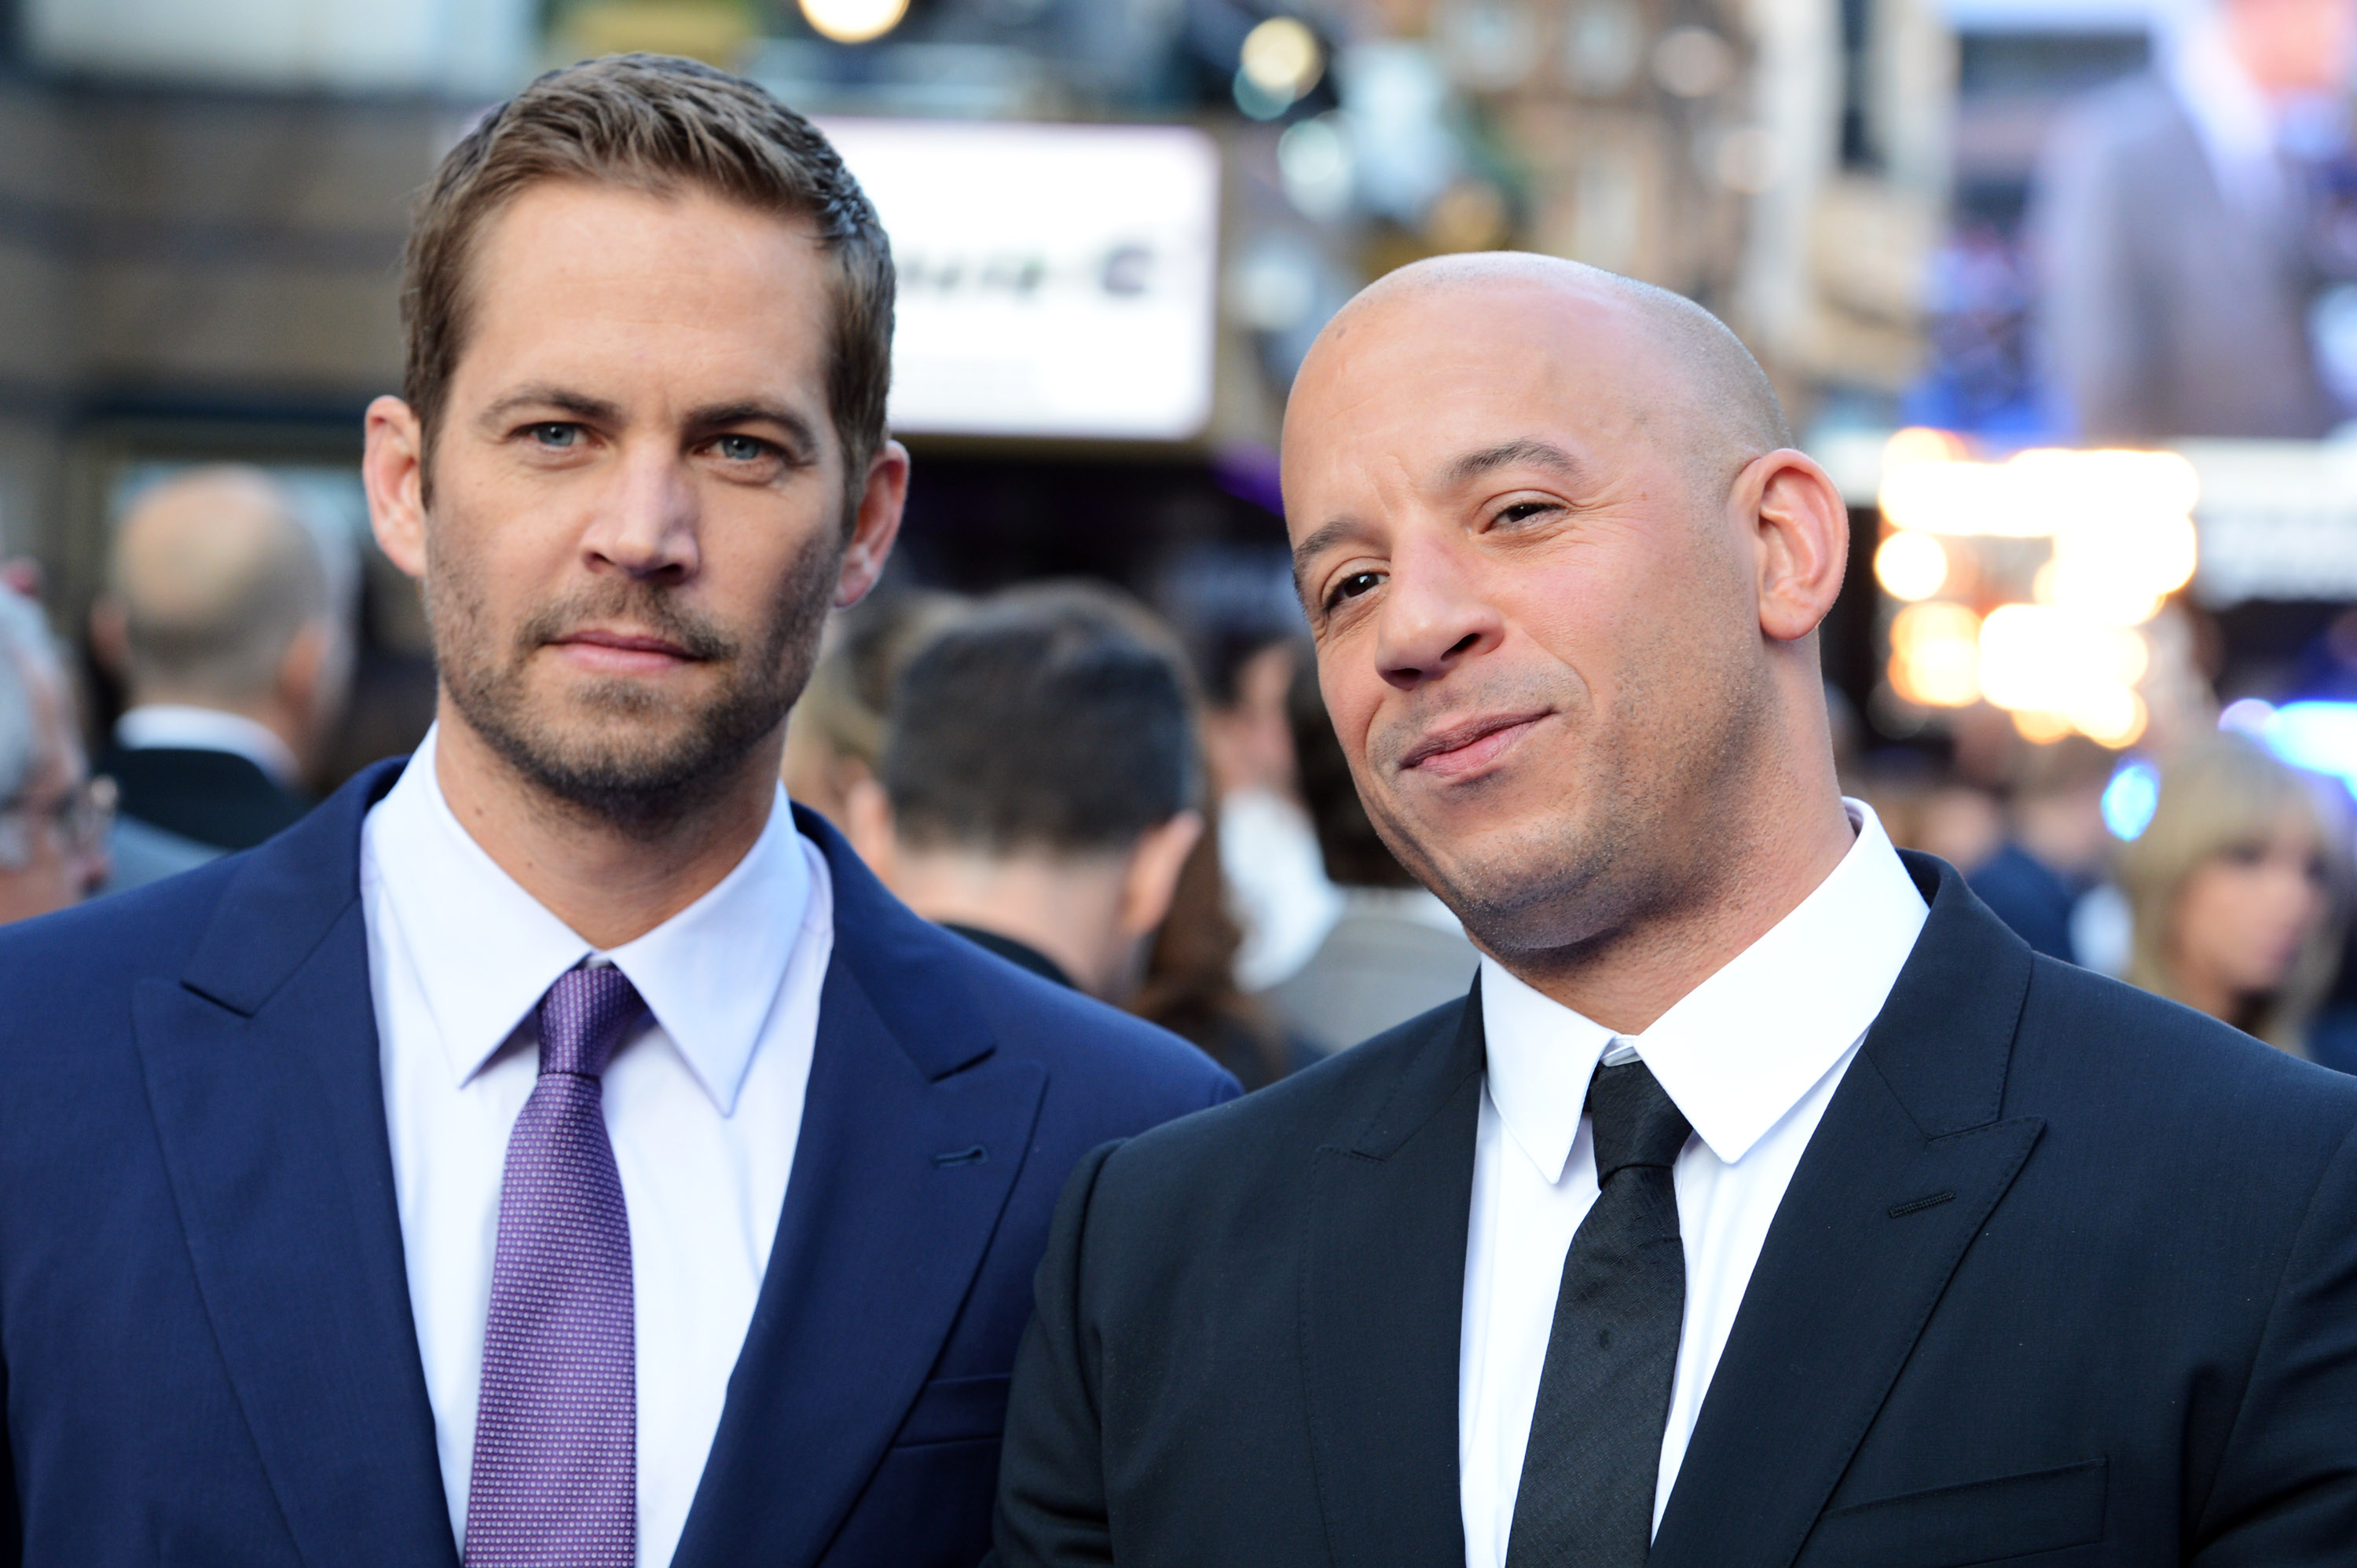 Paul Walker and Vin Diesel on May 7, 2013 in London, England | Source: Getty Images